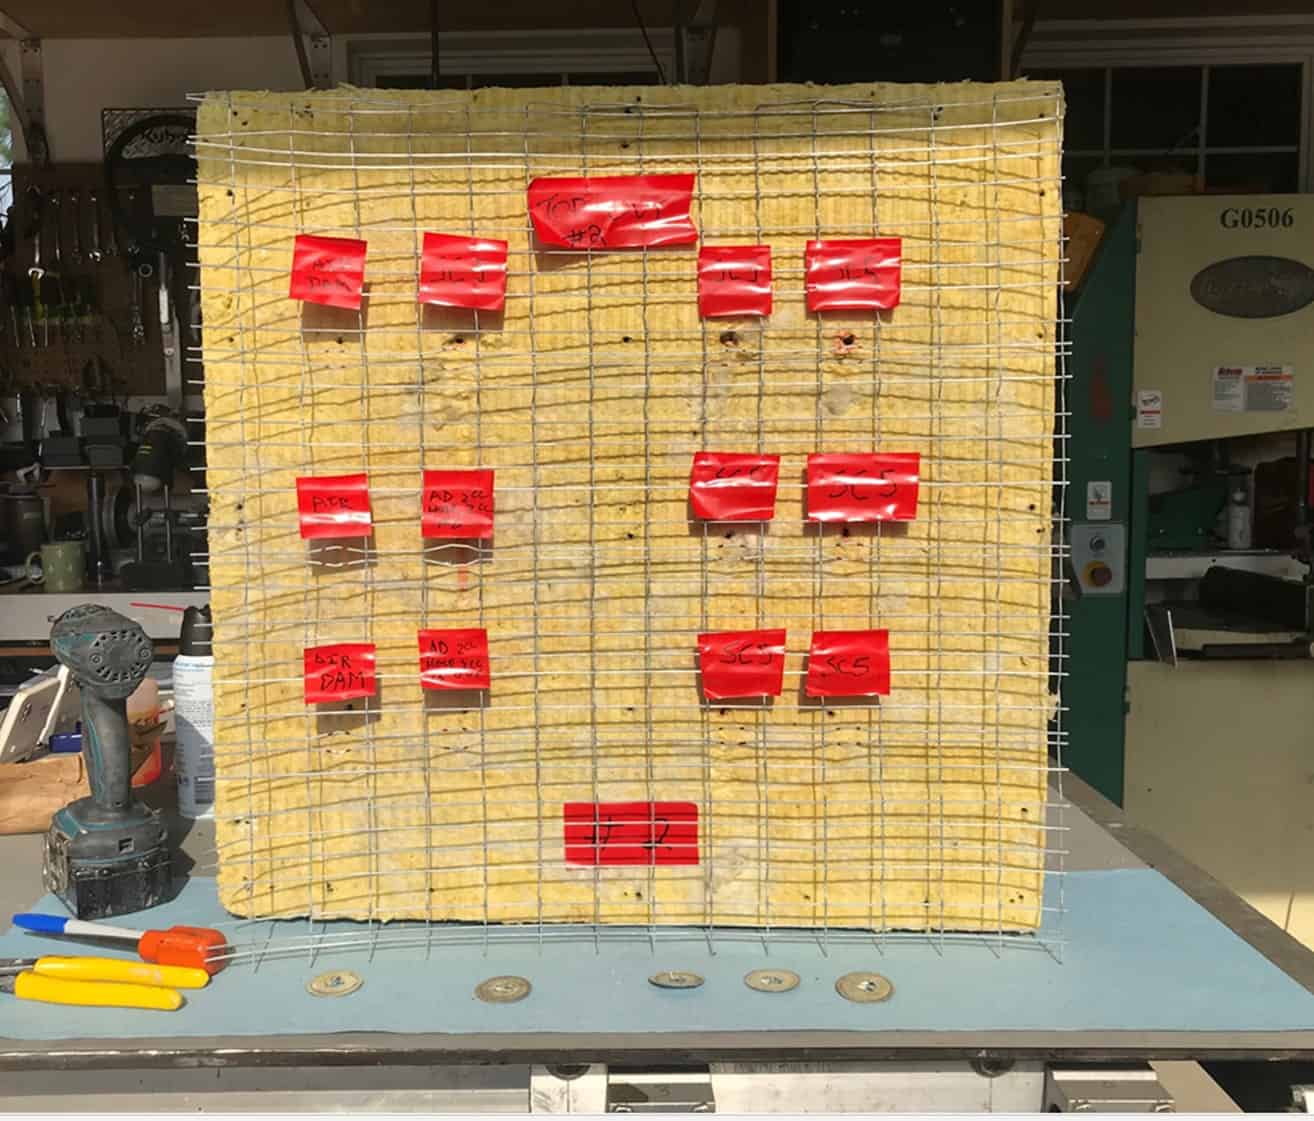 Figure 14.
Lath grid laid over insulation to identify means of sealing material used on both sides of the mockup.
